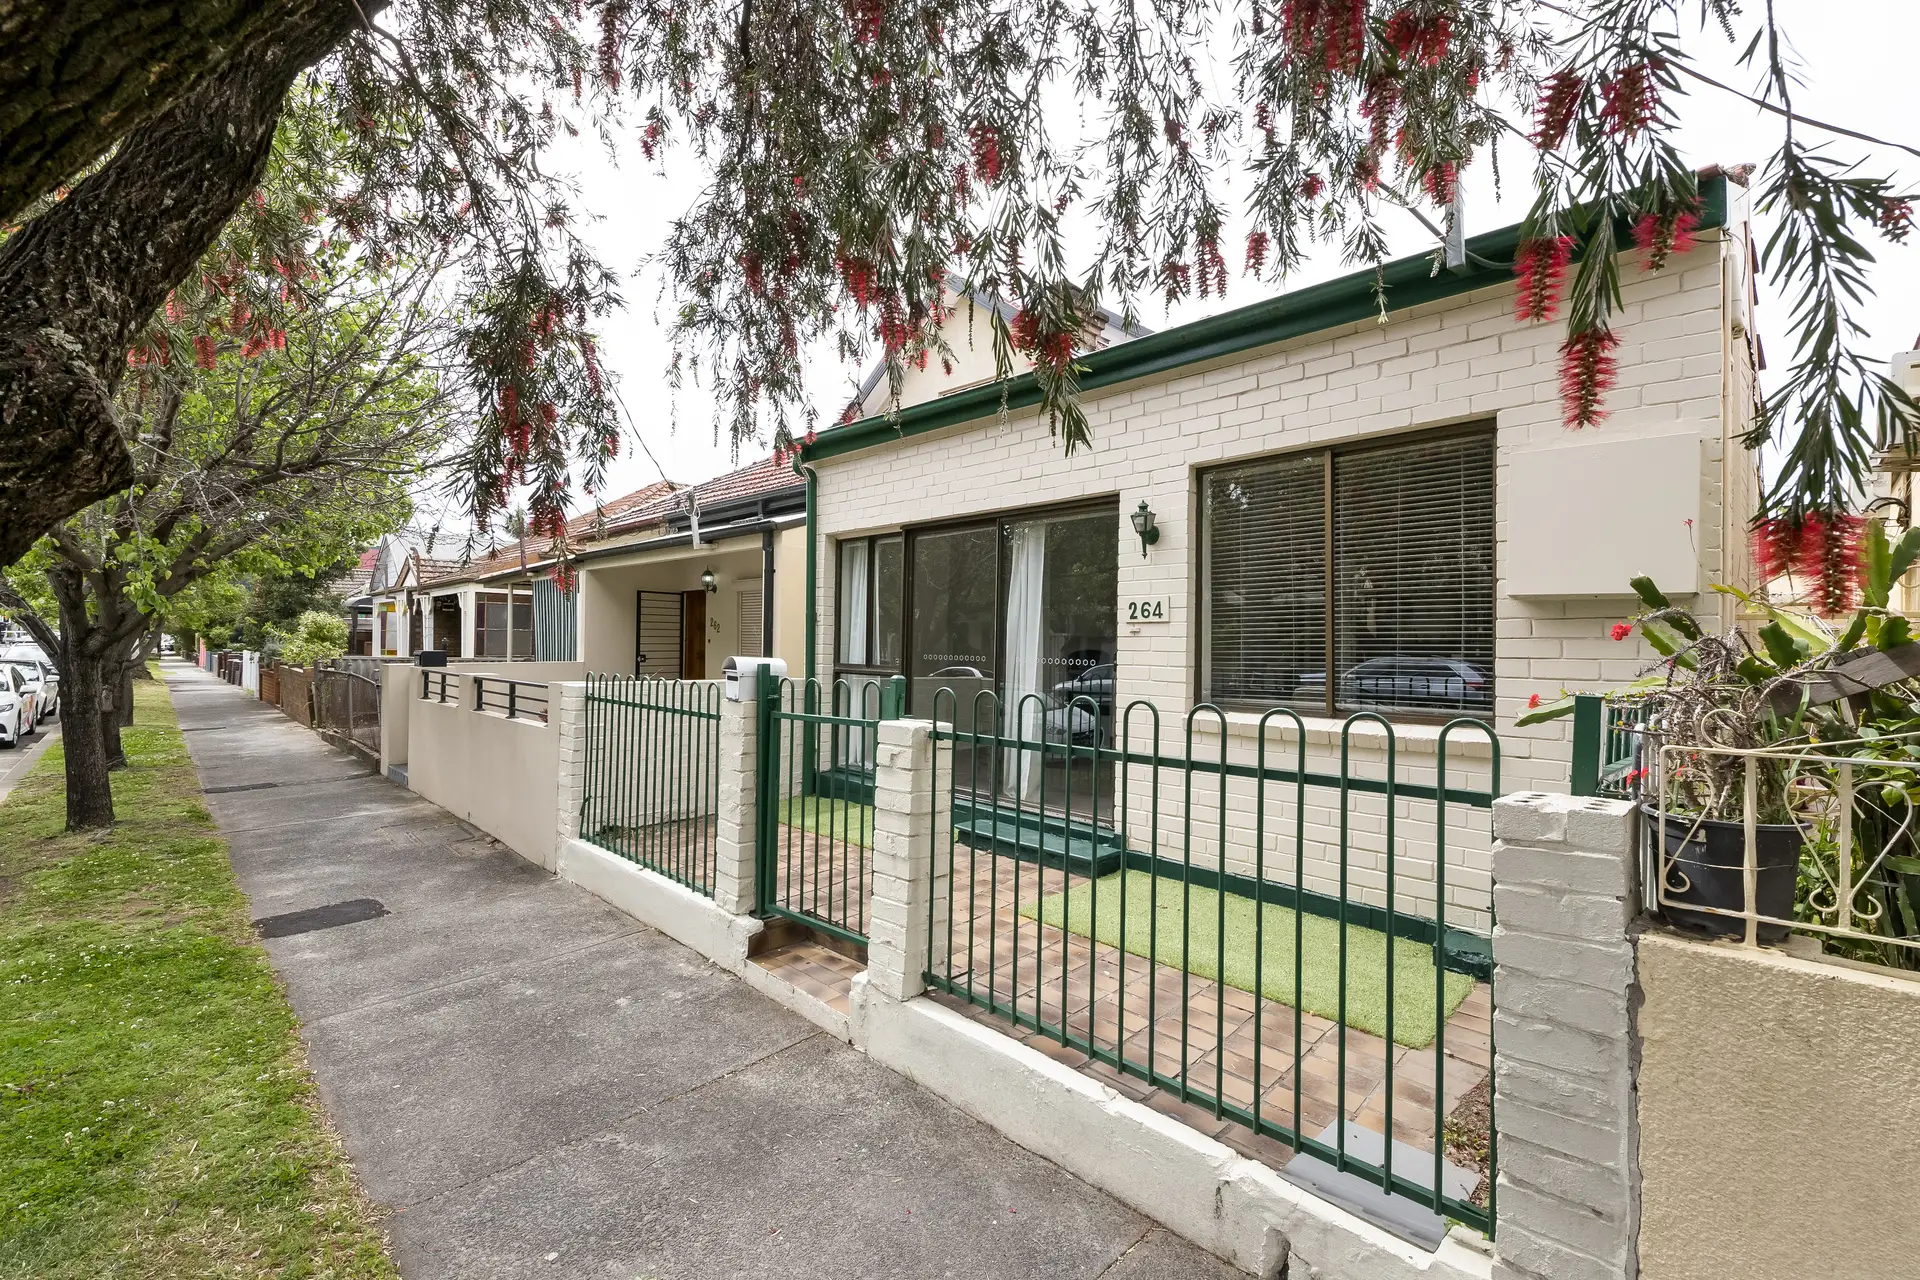 264 Victoria Road, Marrickville Leased by Adrian William